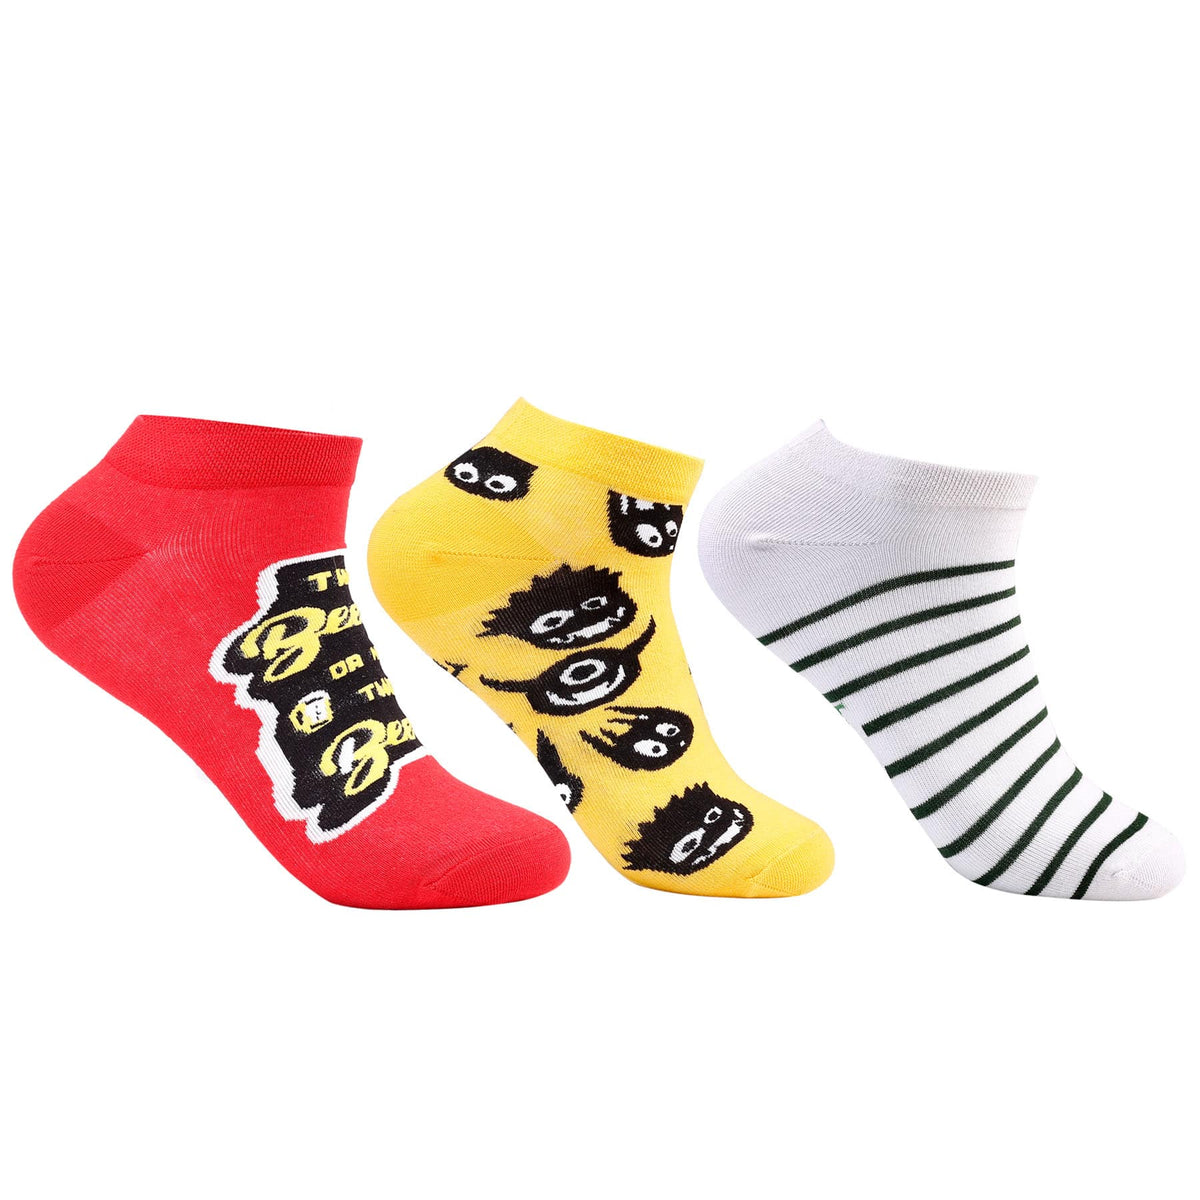 Combo of a 3 Pair Short Ankle Length comfort Socks